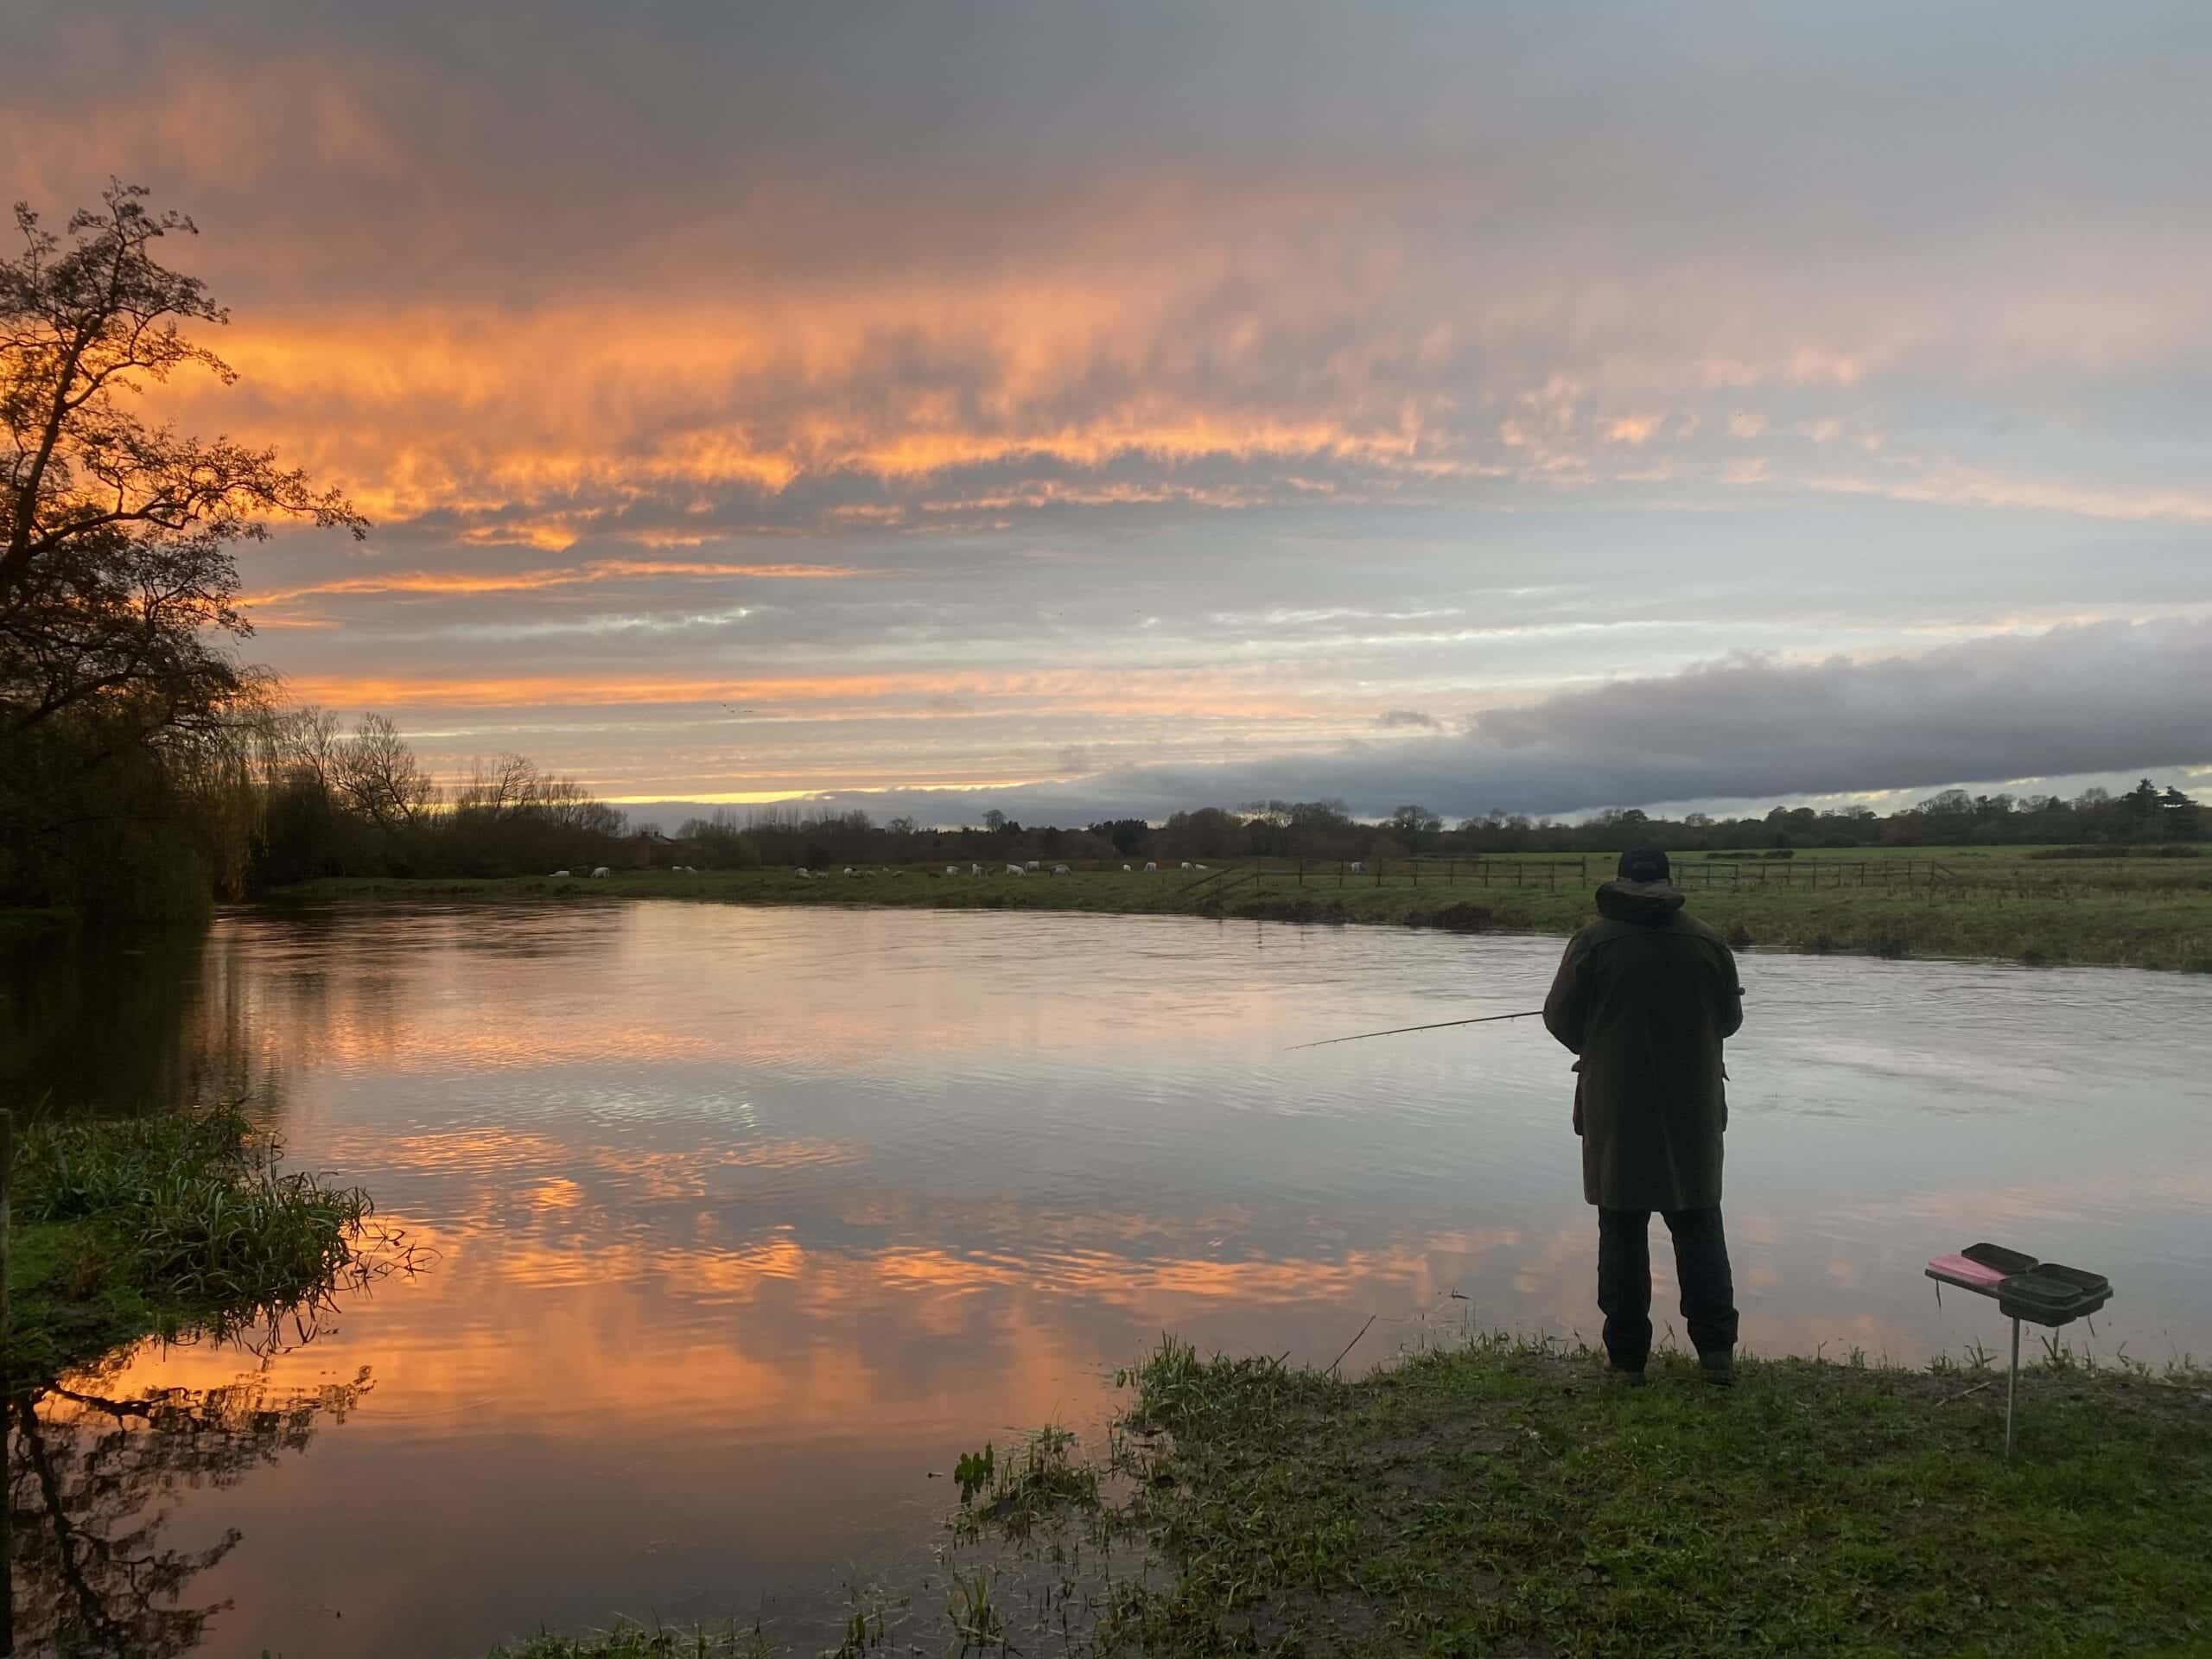 A solitary angler stands with his fishing rod in the sunset on a river